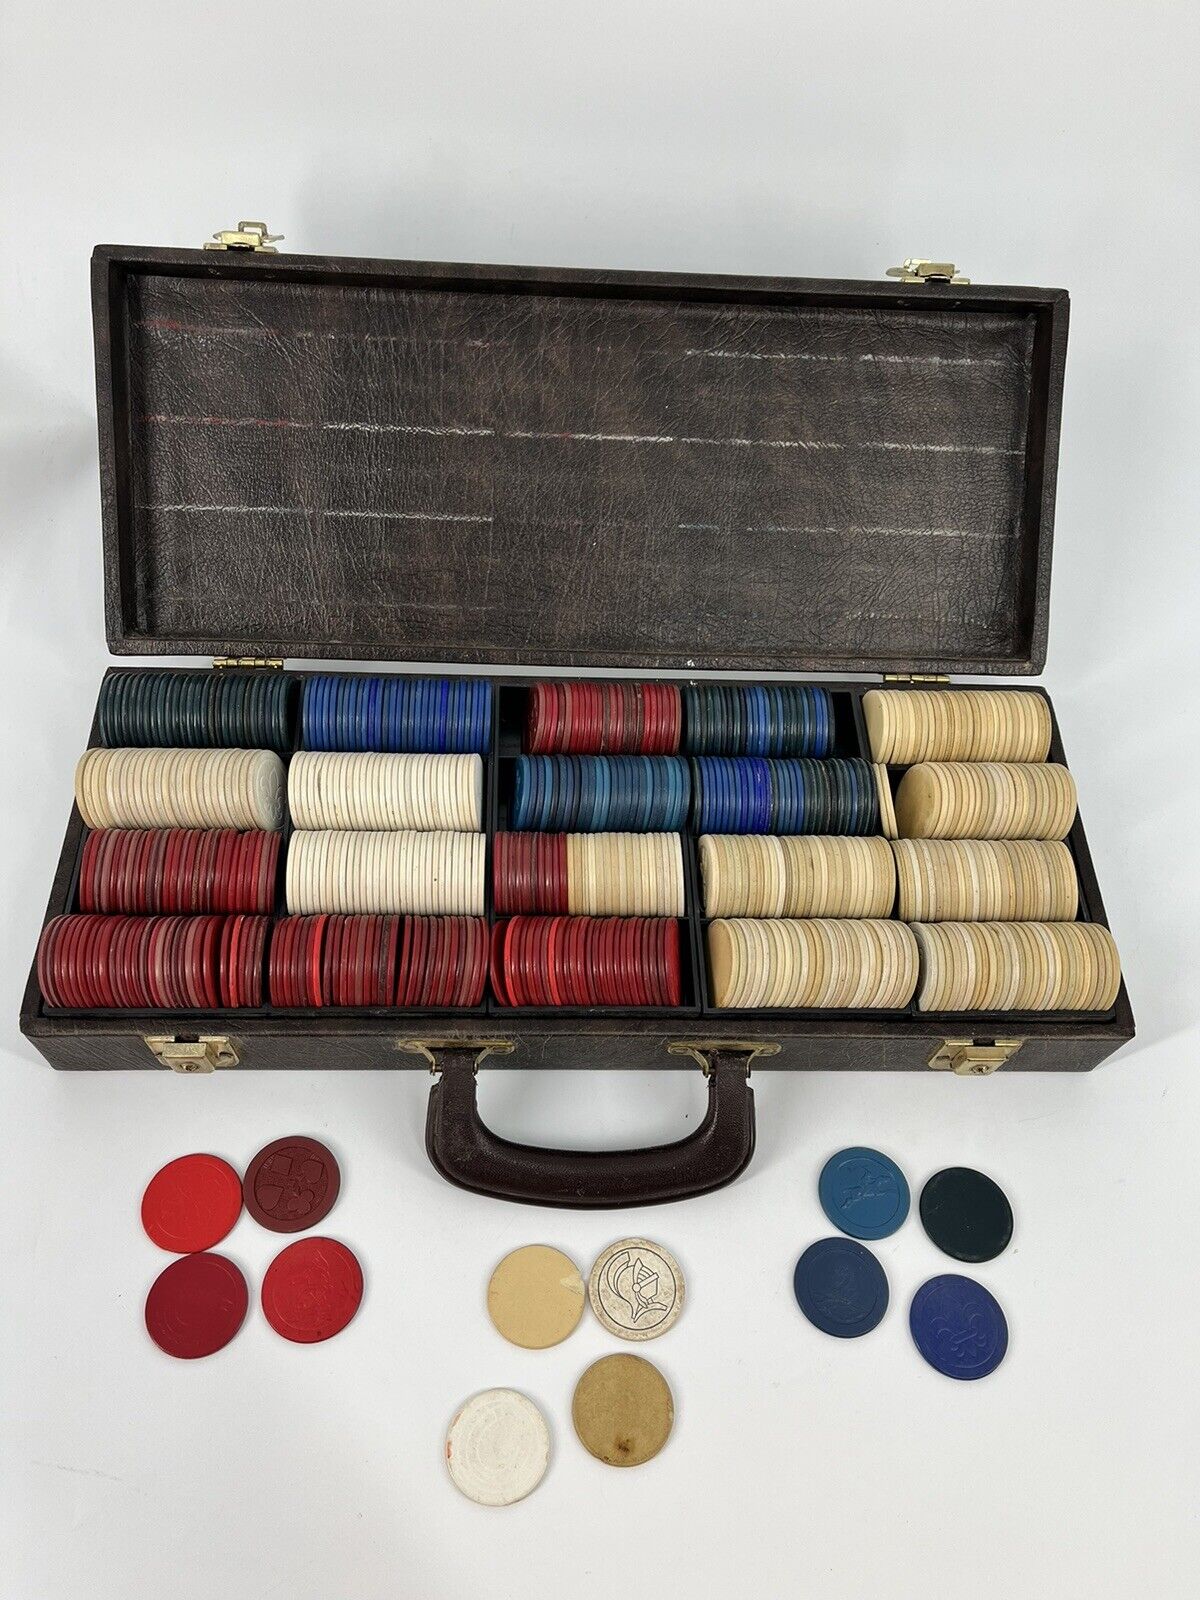 Vintage Poker Chips Markers in carry case - varying symbols - R -W-B